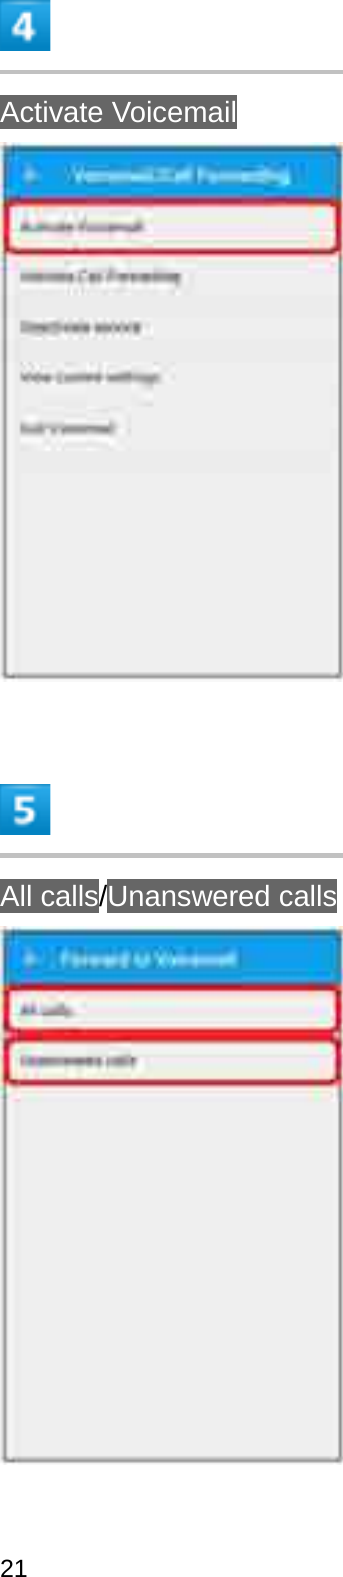 Activate VoicemailAll calls/Unanswered calls21